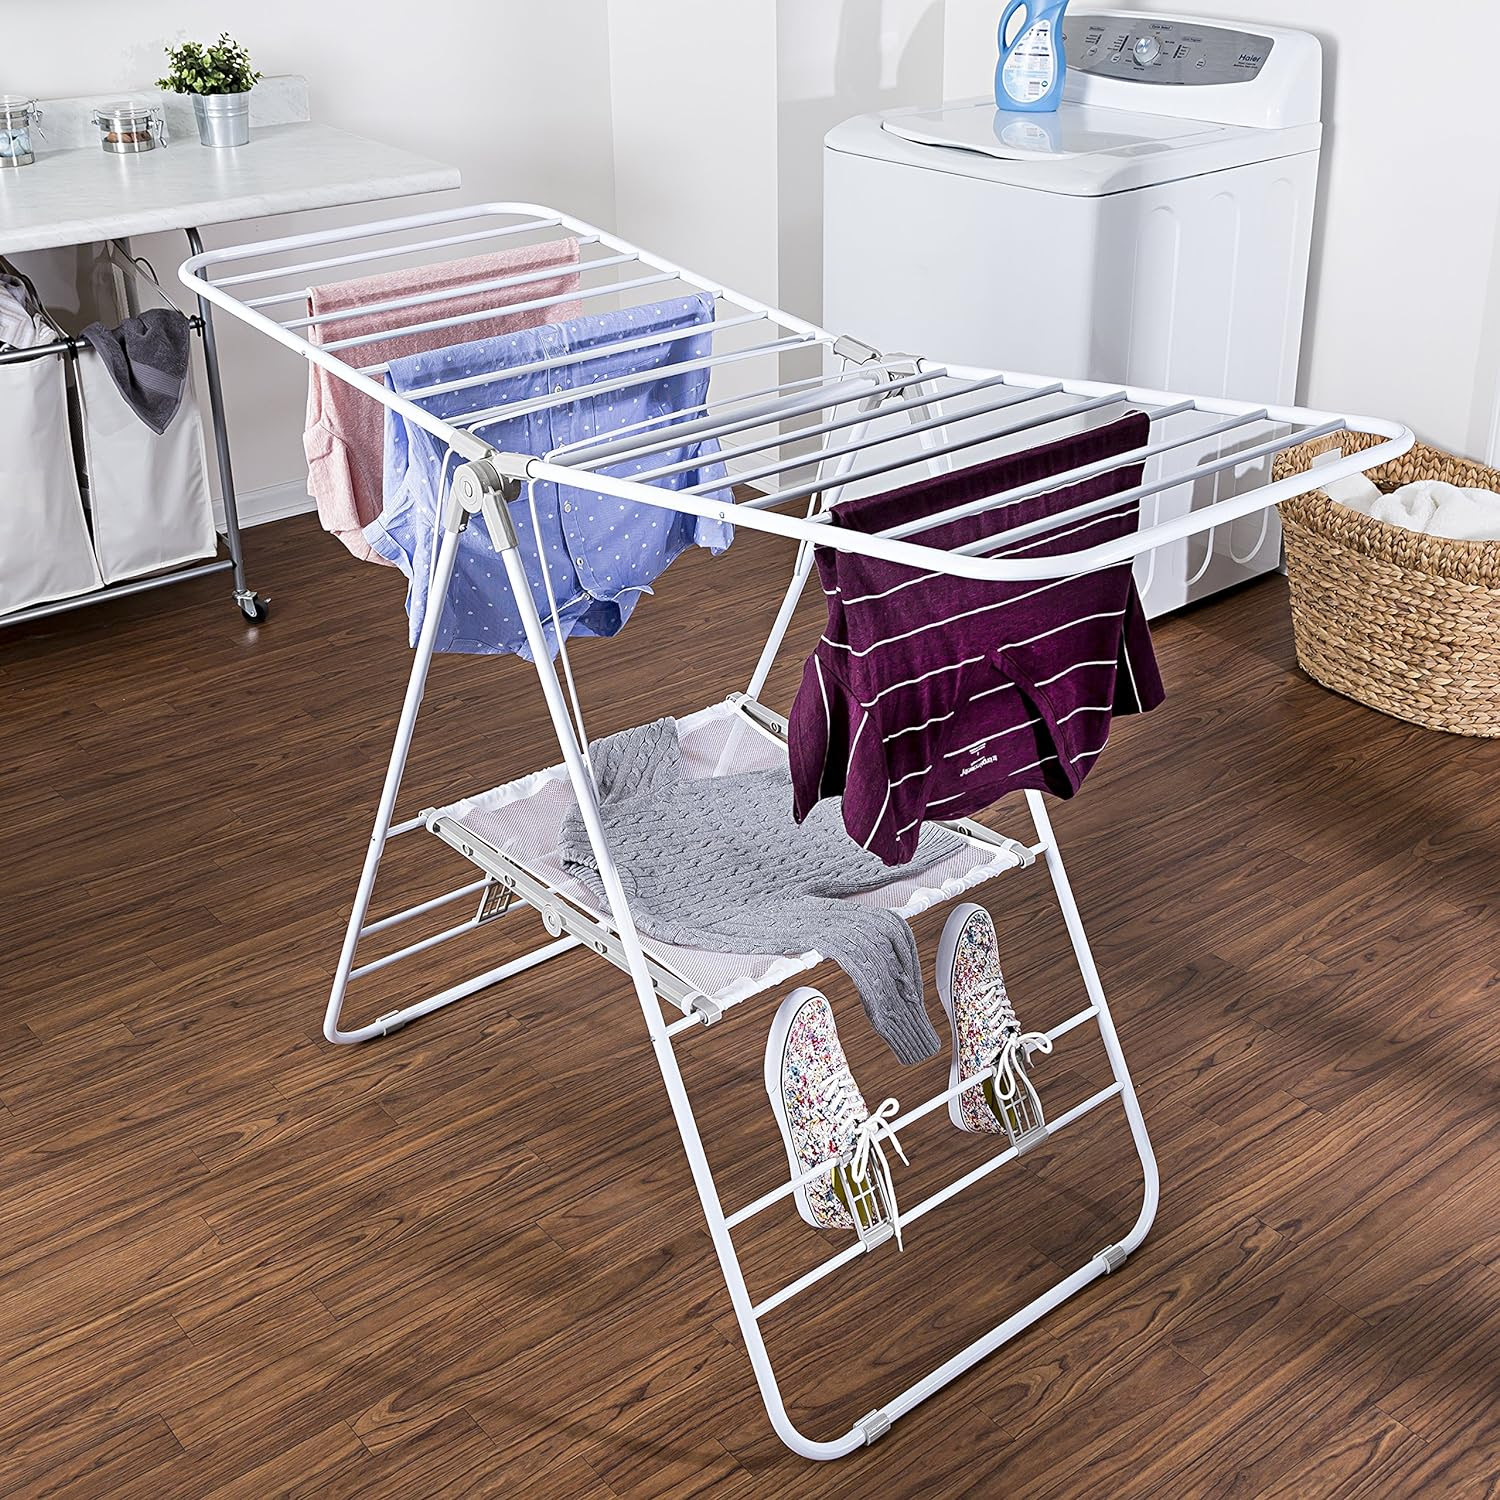 Stainless Steel Clothes Drying Rack. 520 units.